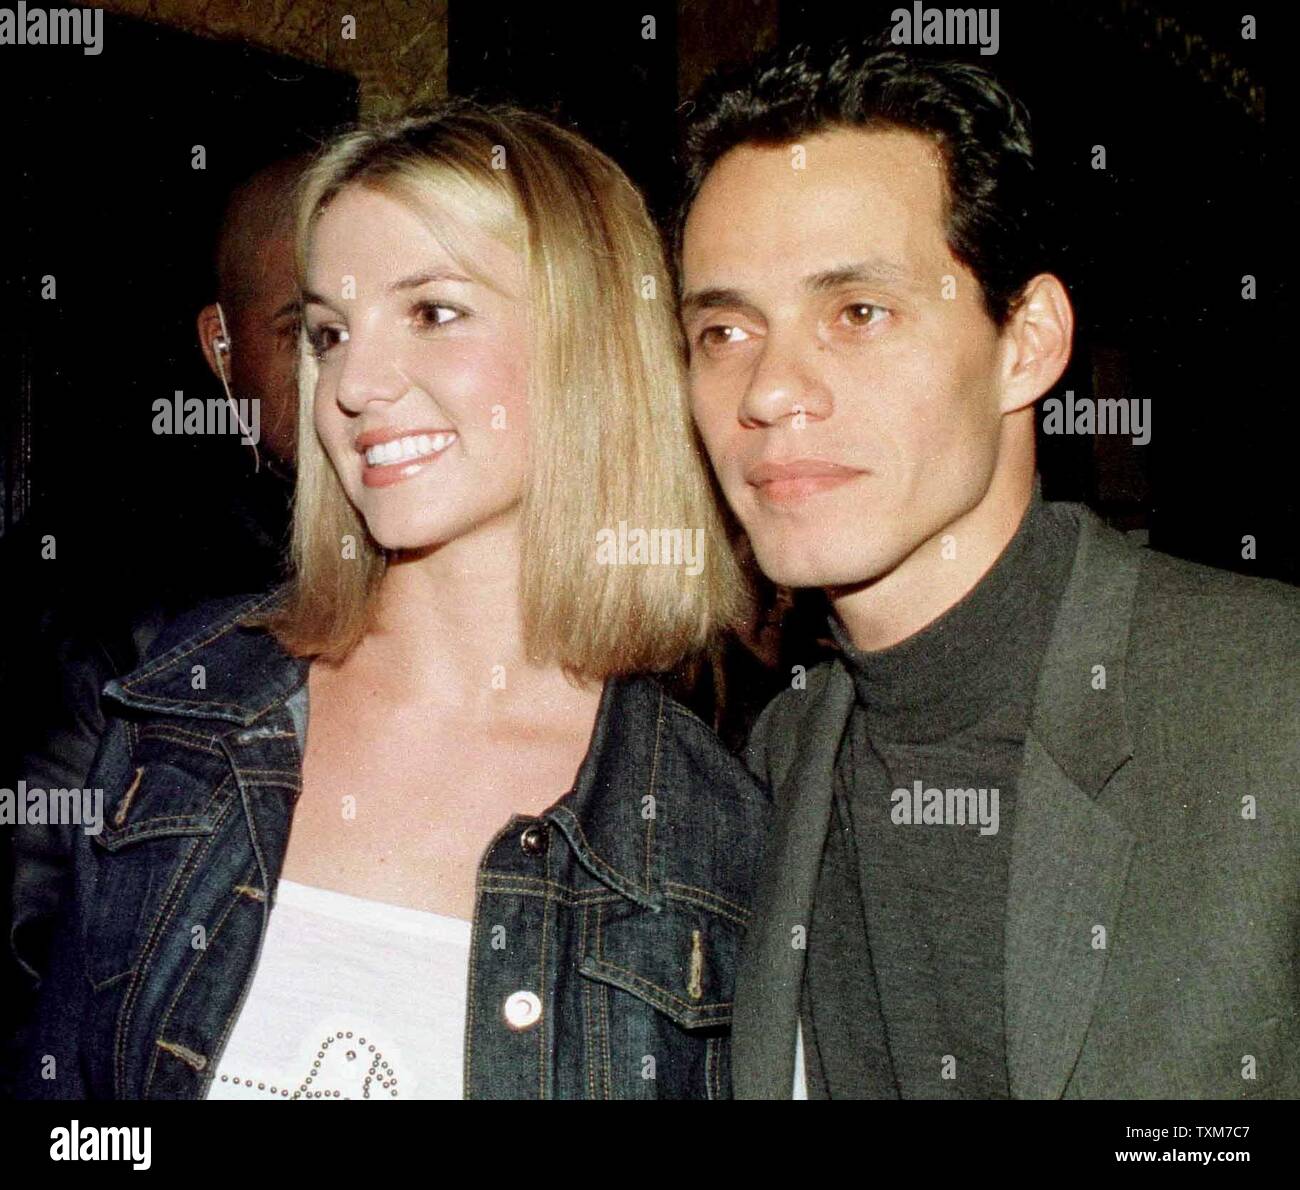 NYP2000010405 - 04 JANUARY 2000 - NEW YORK, NEW YORK, USA: Grammy Award nominees Britney Spears (Best New Artist) and Marc Anthony (Best Male Pop) pose after the January 4  Grammy Awards announcements in New York.   rg/ep/Ezio Petersen  UPI Stock Photo